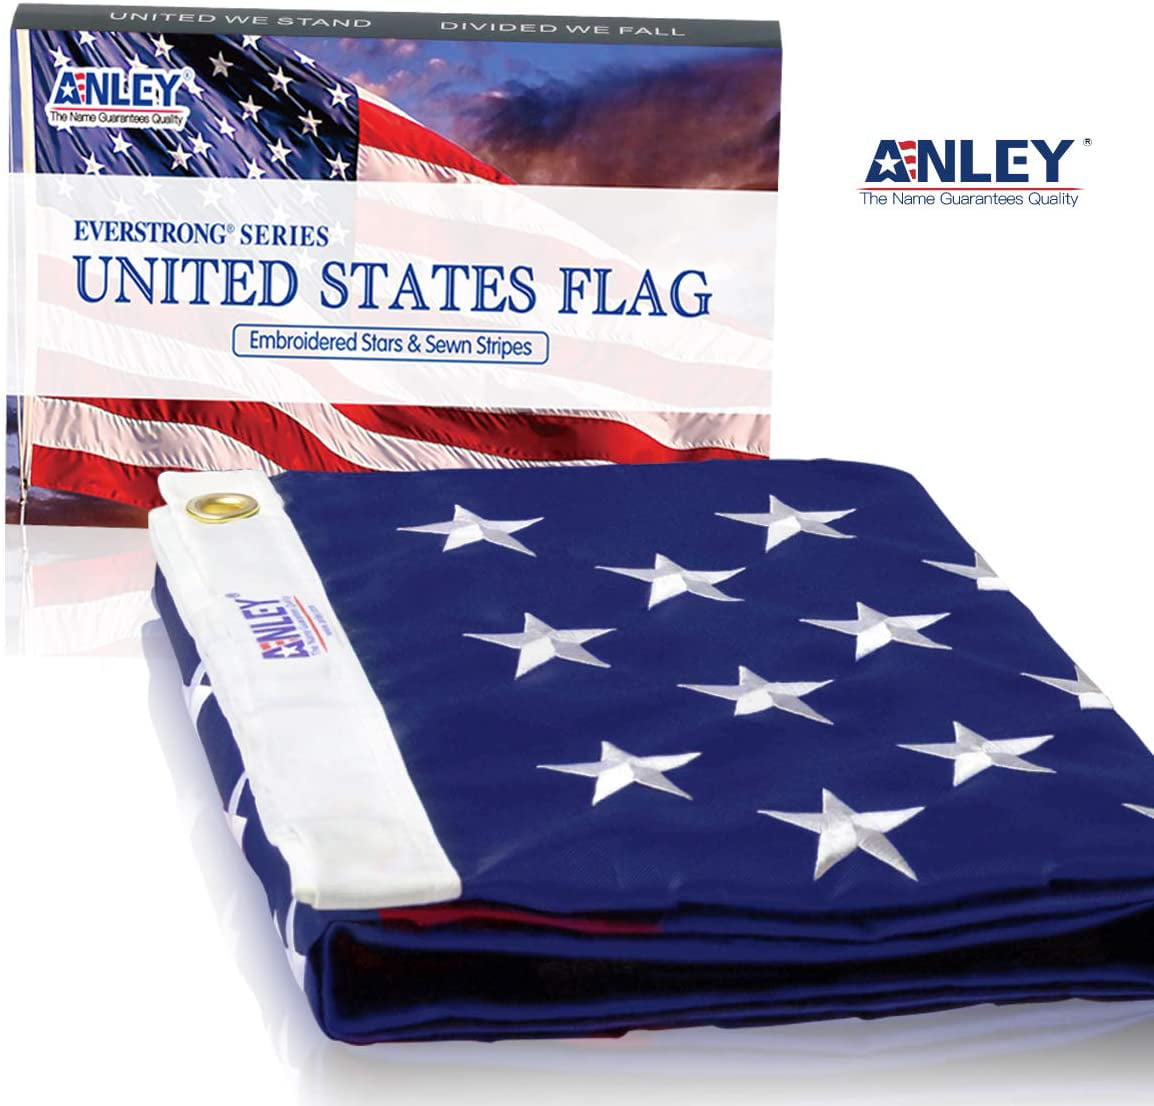 Embroidered Stars and Sewn Stripes American US Flag 3x5 Foot Heavy Duty Nylon EverStrong Series ANLEY USA Banner Flags with Brass Grommets 3 X 5 Foot 4 Rows of Lock Stitching 